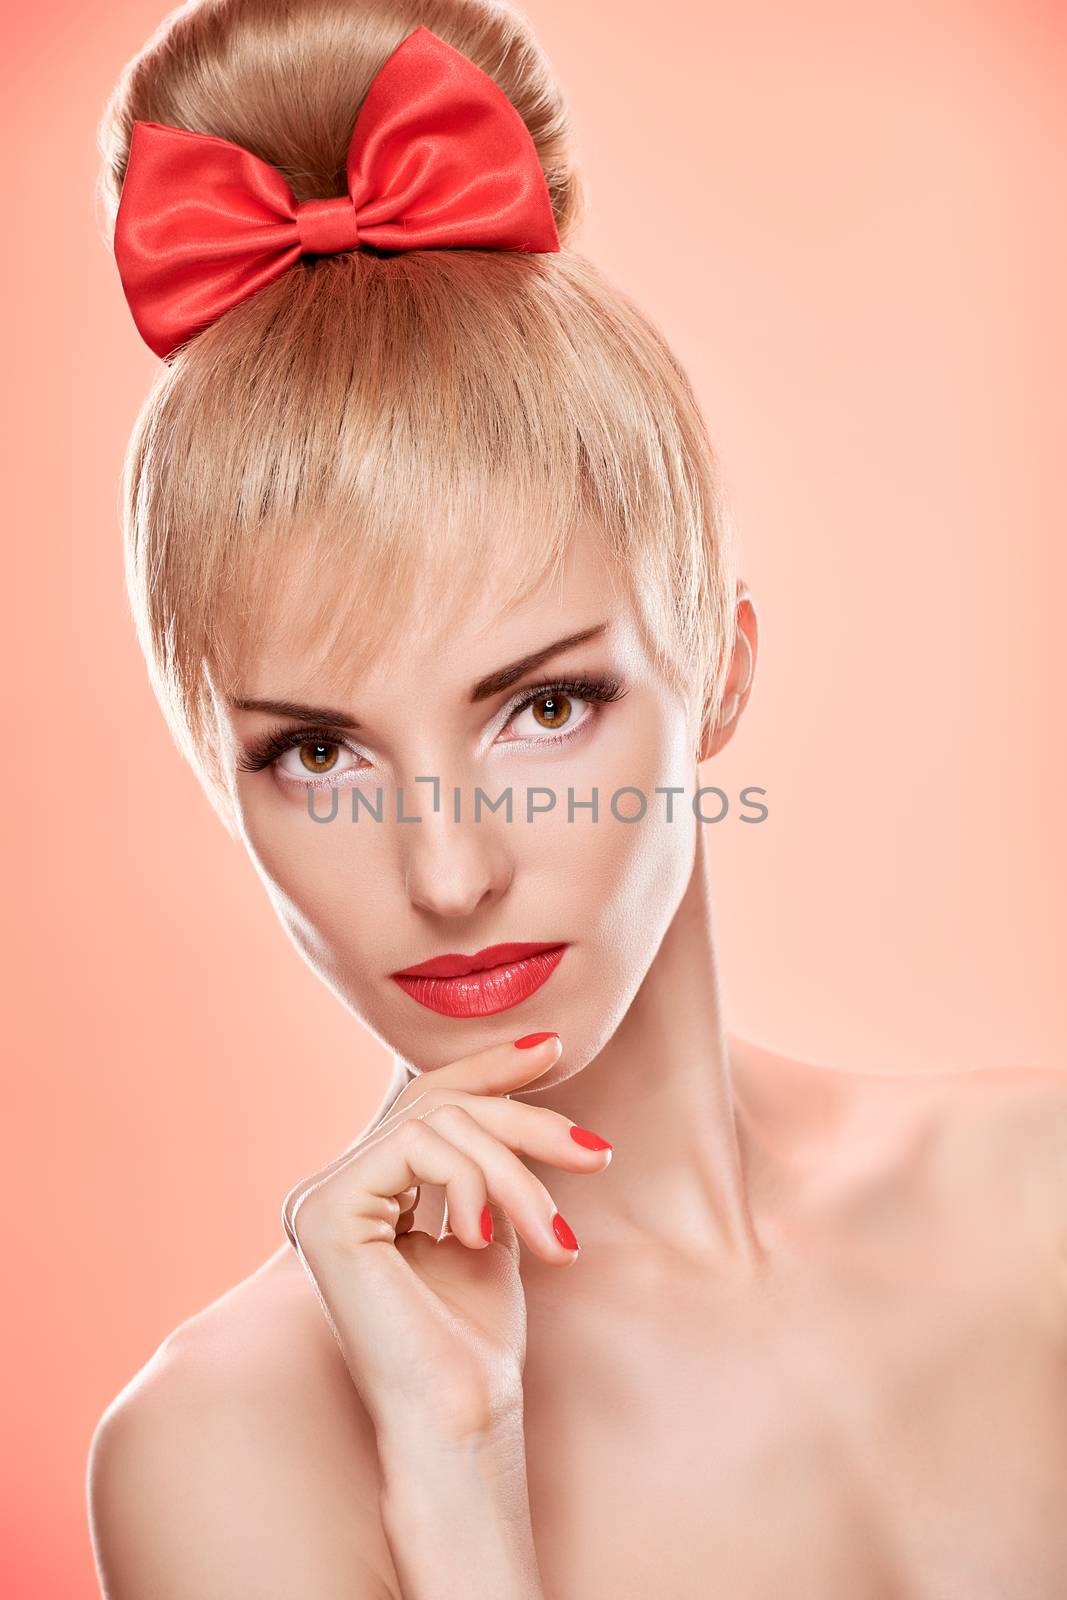 Beauty fashion portrait loving woman dreaming. Sensual attractive pretty nude blonde sexy girl, Pinup hairstyle, red bow. Confidence unusual emotional playful.Romantic, retro vintage, skincare on pink